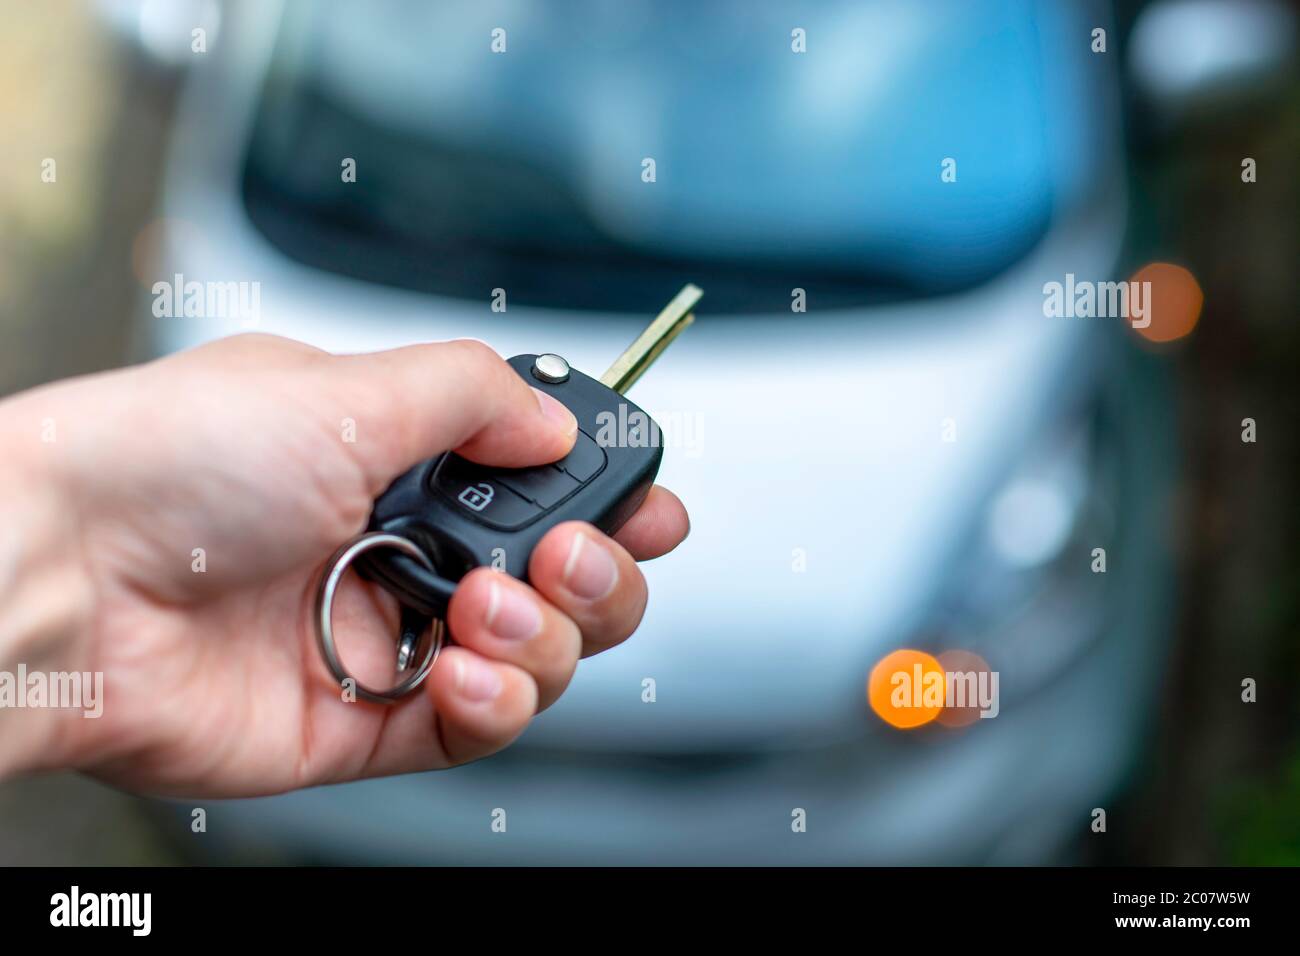 Women hand hand holding contactless car key and pressing the button on the remote to lock or unlock the car. Flashing lights of the car Stock Photo